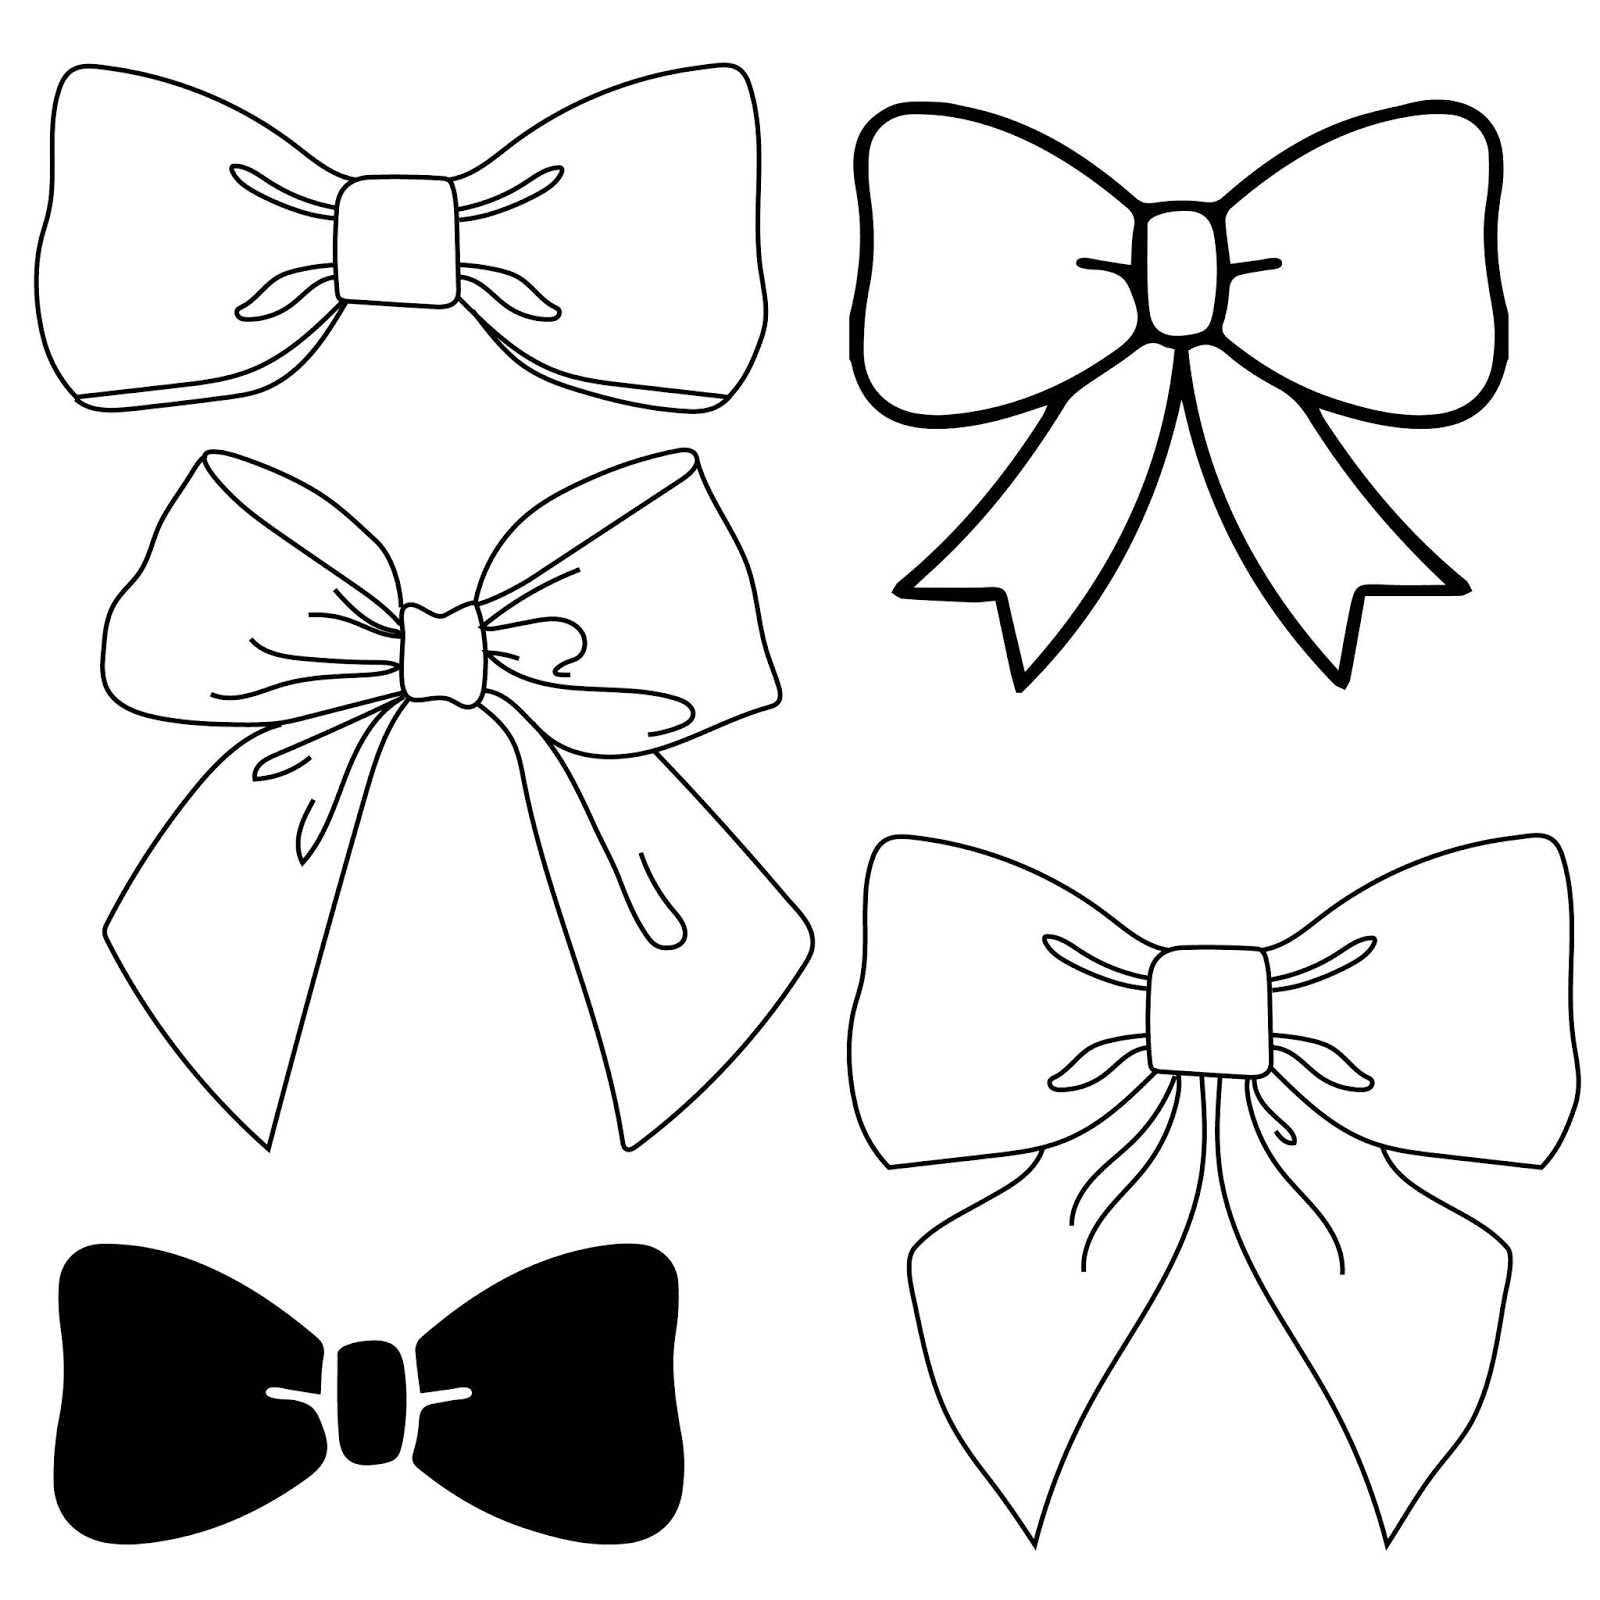 Free Bow Silhouette SVG DXF Cut File